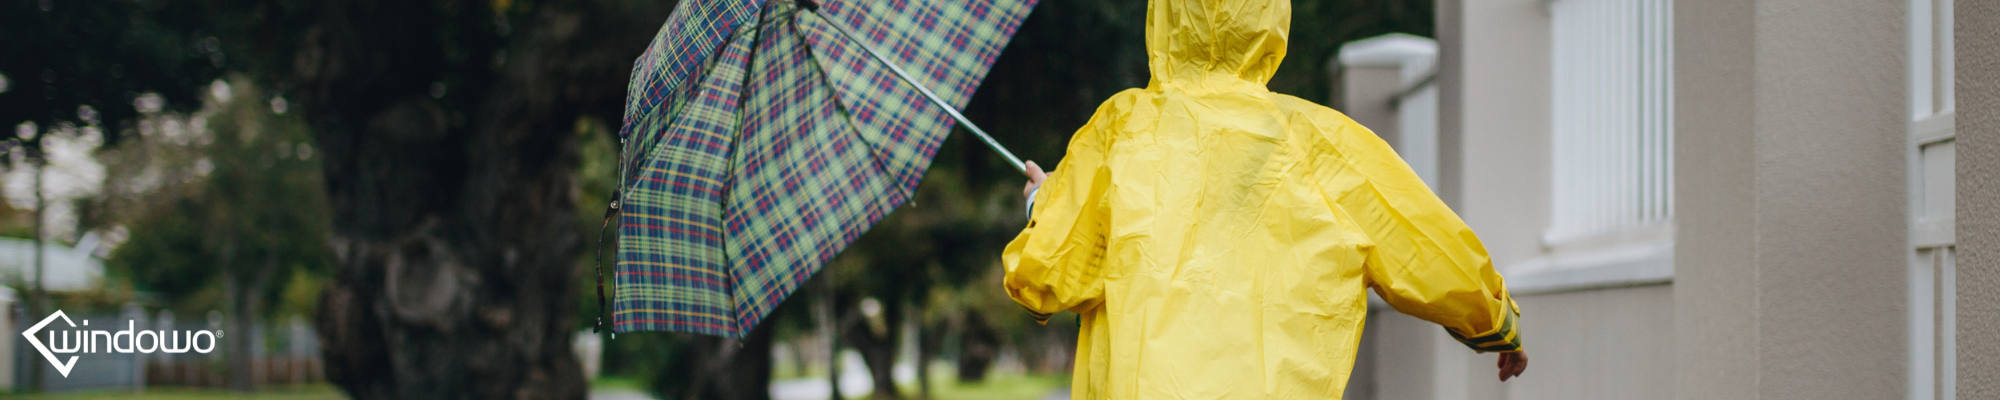 The best waterproofing products